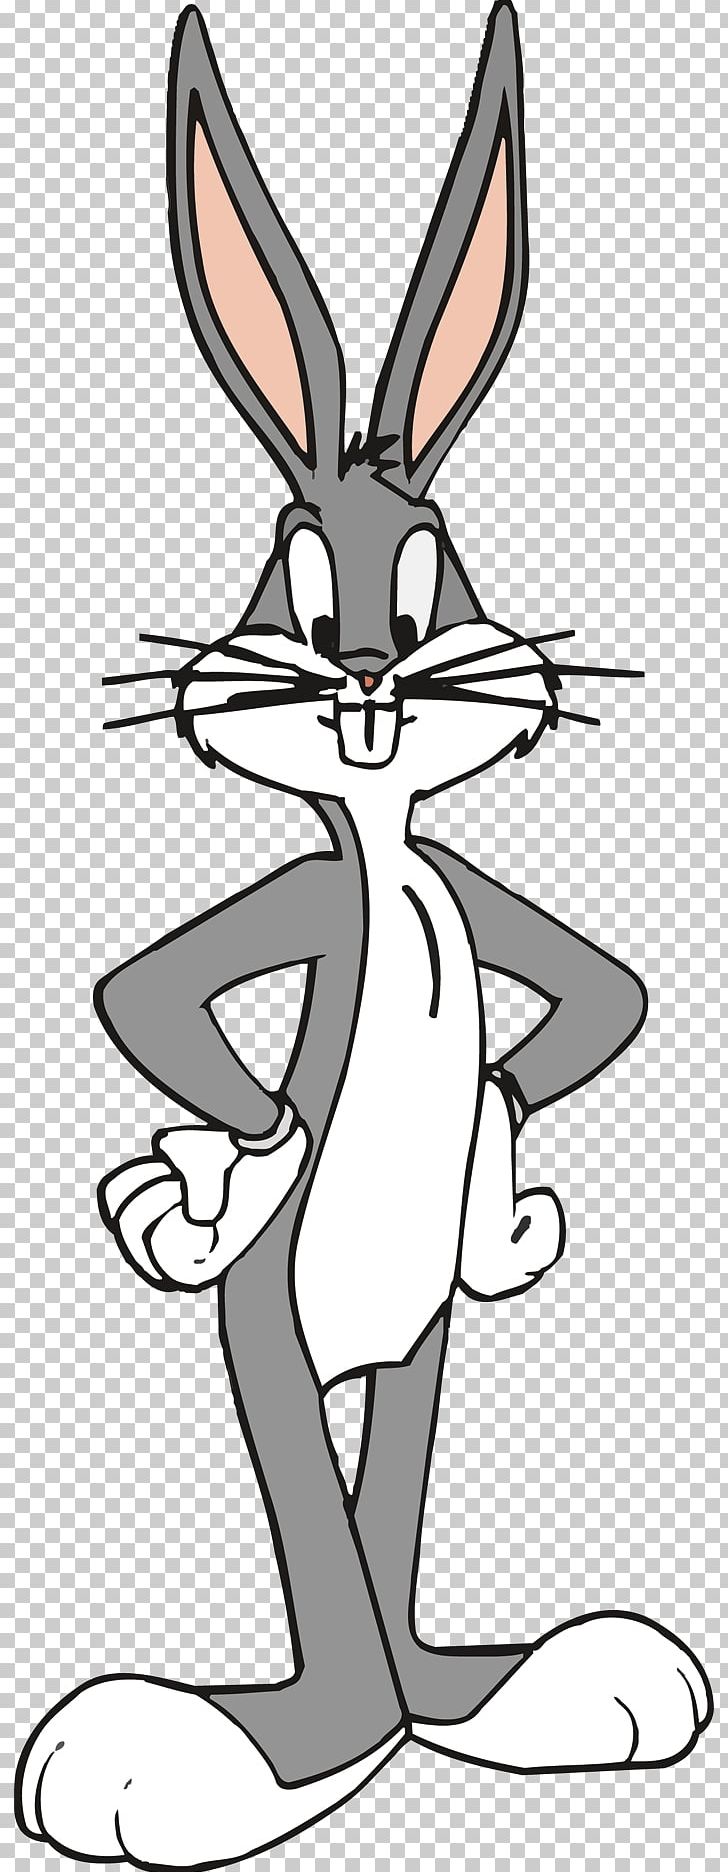 Bugs Bunny Porky Pig Cartoon Looney Tunes PNG, Clipart, Animals, Animated Cartoon, Artwork, Black And White, Bugs Bunny Show Free PNG Download